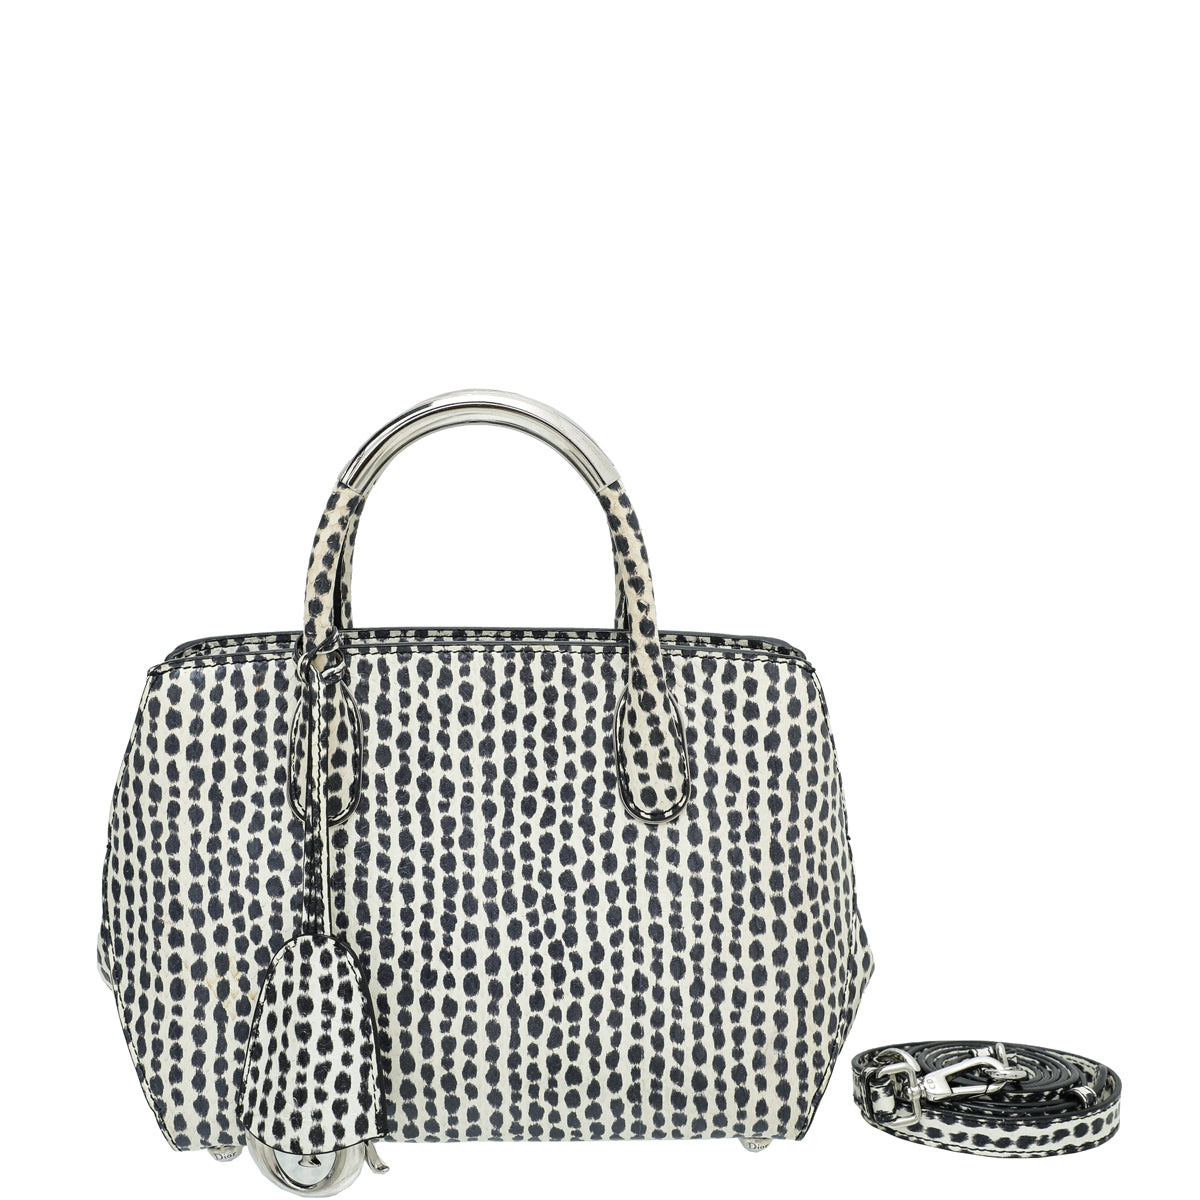 Christian Dior Bicolor Dior Spotted Ayers Open Bar Bag